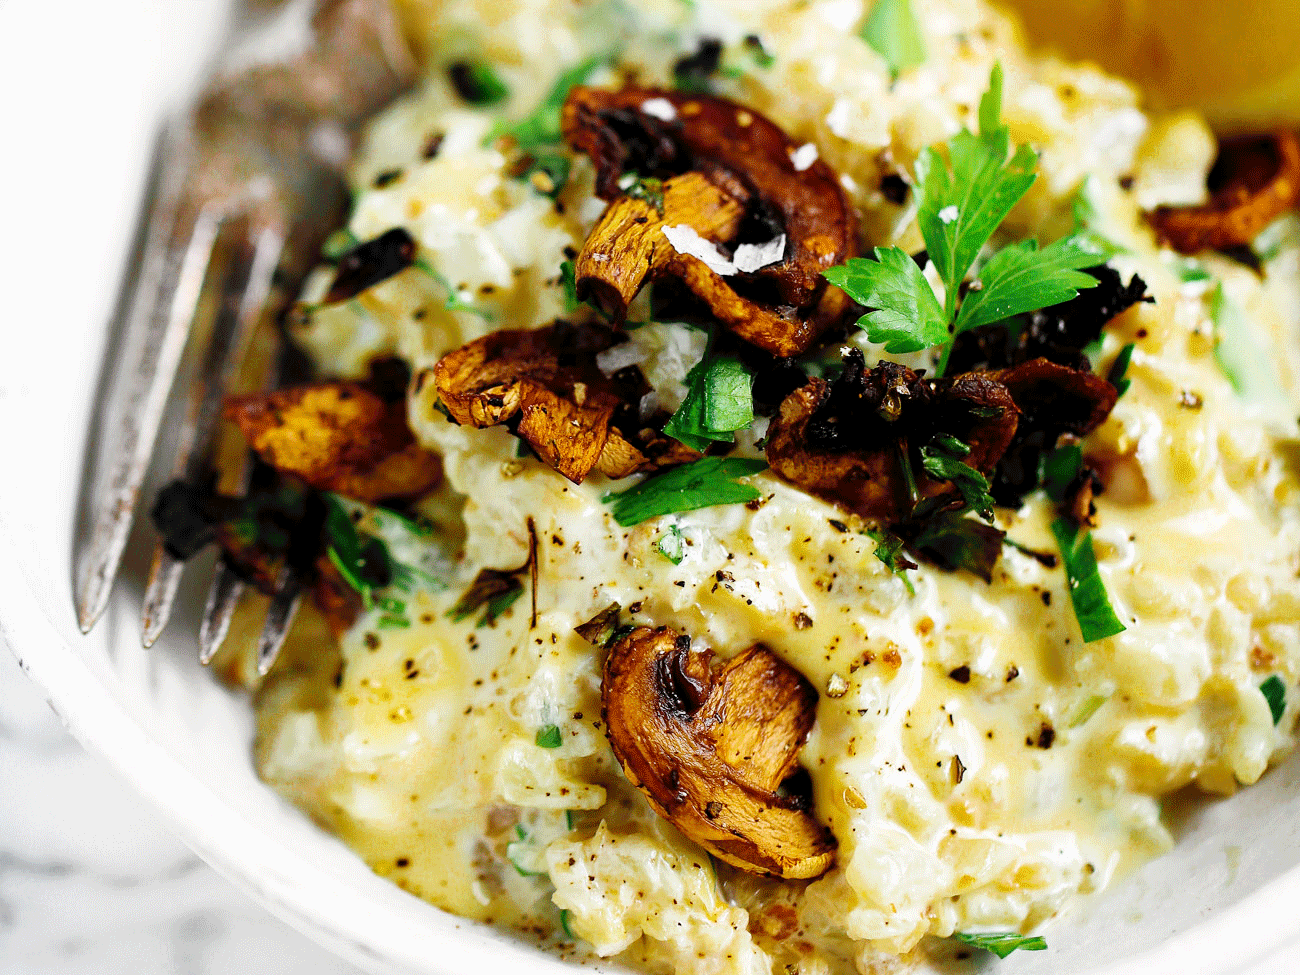 This recipe for whole30 “cheesy” risotto will leave you wanting more! Healthy whole30 and paleo creamy cauliflower risotto with truffle toasted mushrooms and a silky smooth best ever vegan cheese sauce! Only three minutes cooking time! whole30 meal plan. Easy whole30 dinner recipes. Easy whole30 dinner recipes. Whole30 recipes. Whole30 lunch. Whole30 meal planning. Whole30 meal prep. Healthy paleo meals. Healthy Whole30 recipes. Easy Whole30 recipes. Easy whole30 dinner recipes. Best whole30 dinner recipes. Best cauliflower fried rice recipe. Easy cauliflower rice. Best cauliflower rice. Healthy paleo dinner recipe. Easy paleo meal ideas.